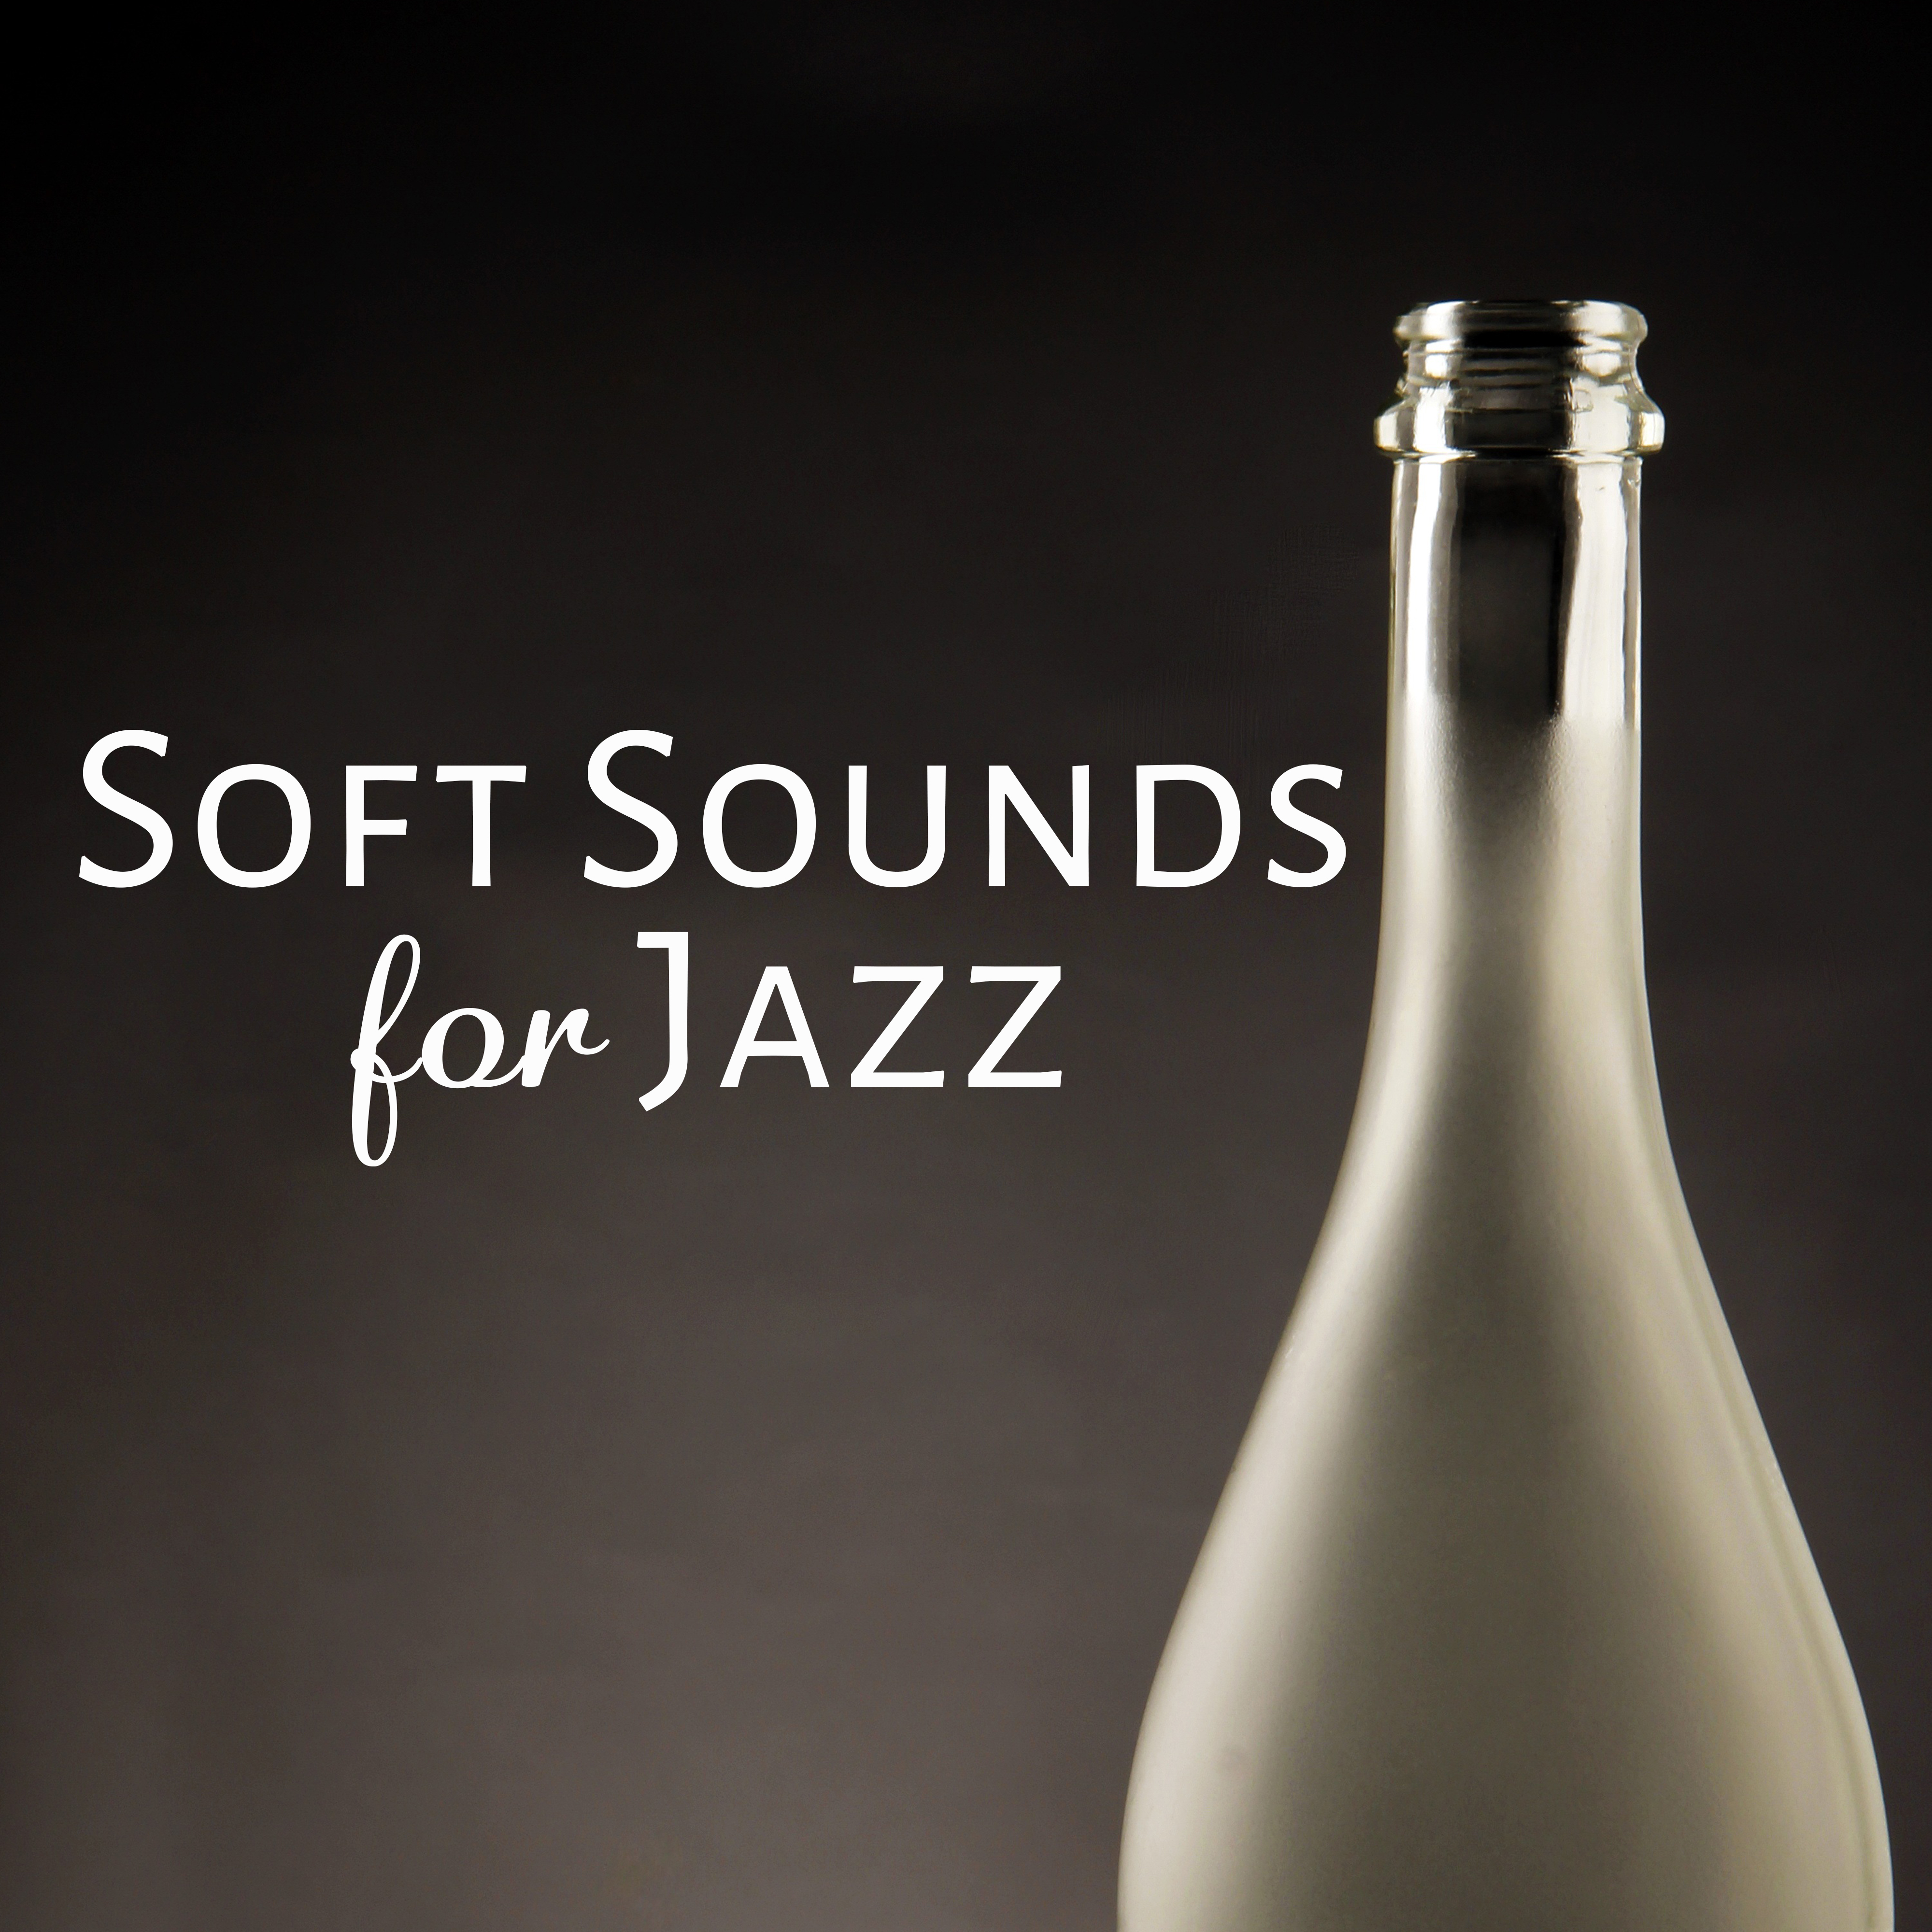 Soft Sounds for Jazz – Relaxing Therapy at Night, Gentle Piano Bar, Cocktails & Drinks, Chilled Jazz, Dinner with Friends, Smooth Jazz